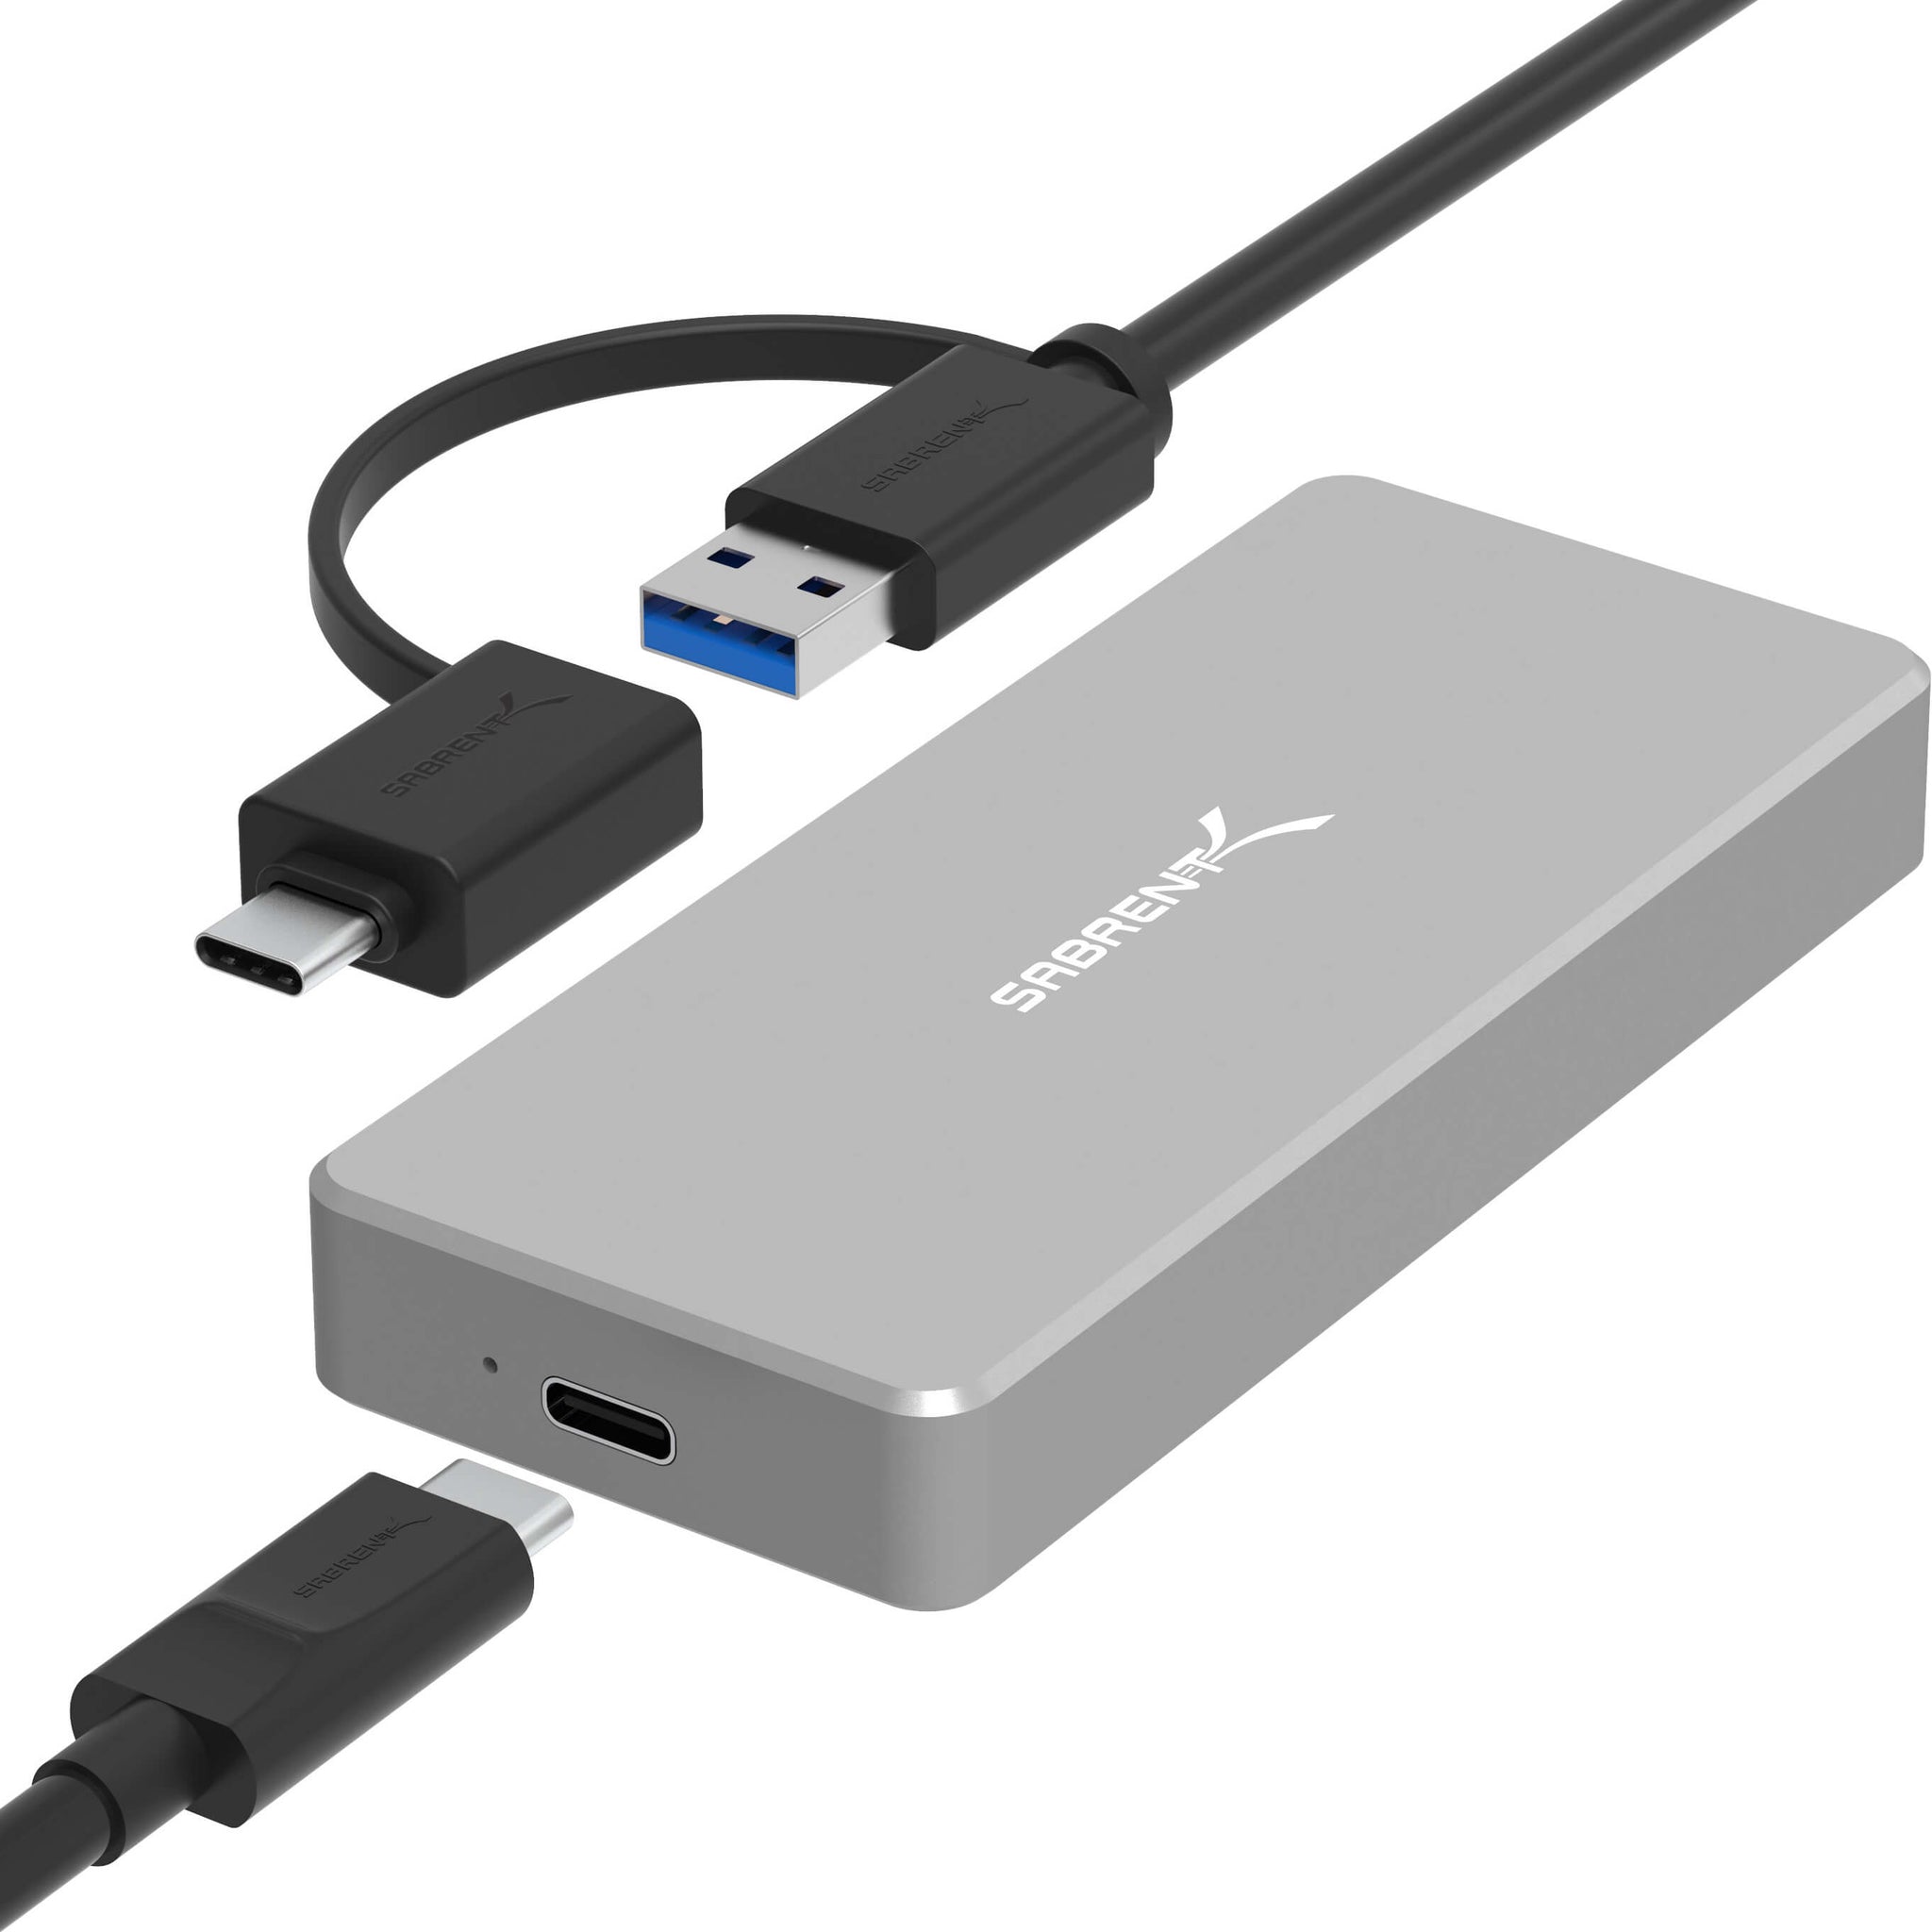 Sabrent M.2 SSD to 2.5-Inch SATA III Aluminum Enclosure Adapter (EC-M2SA) -  Buy Sabrent M.2 SSD to 2.5-Inch SATA III Aluminum Enclosure Adapter  (EC-M2SA) Online at Low Price in India 